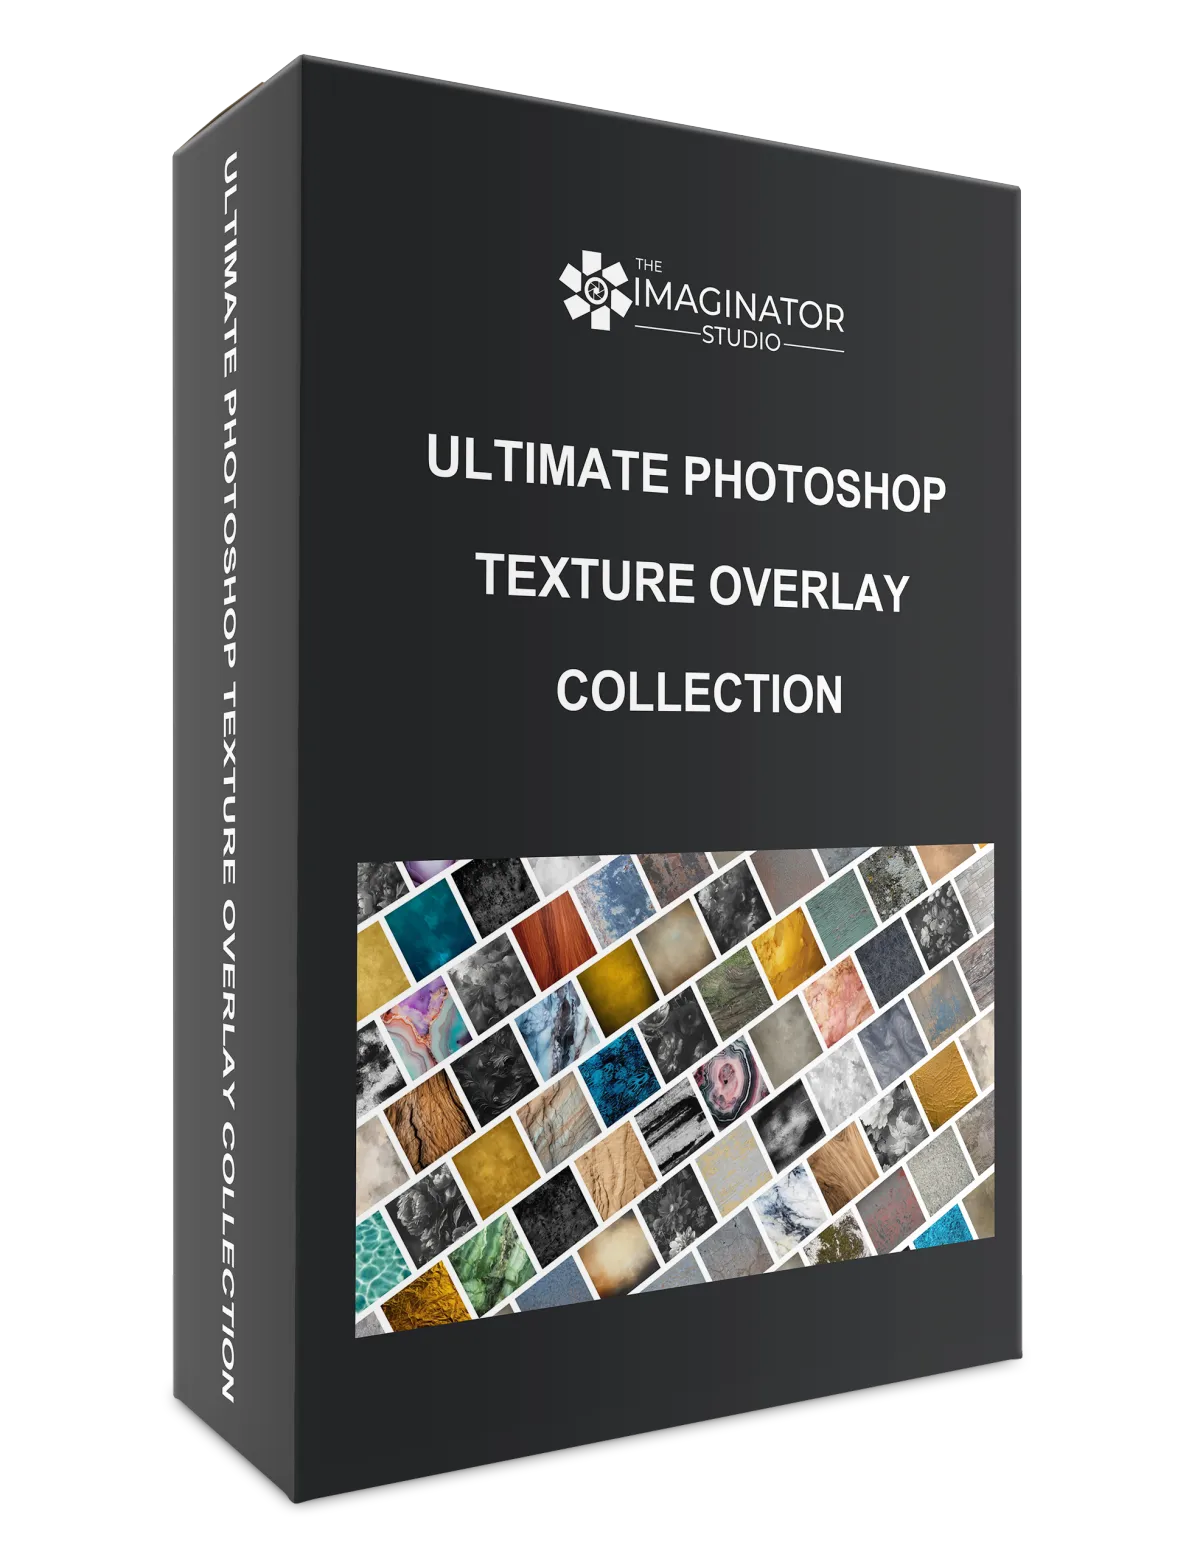 the ultimate photoshop texture overlay collection